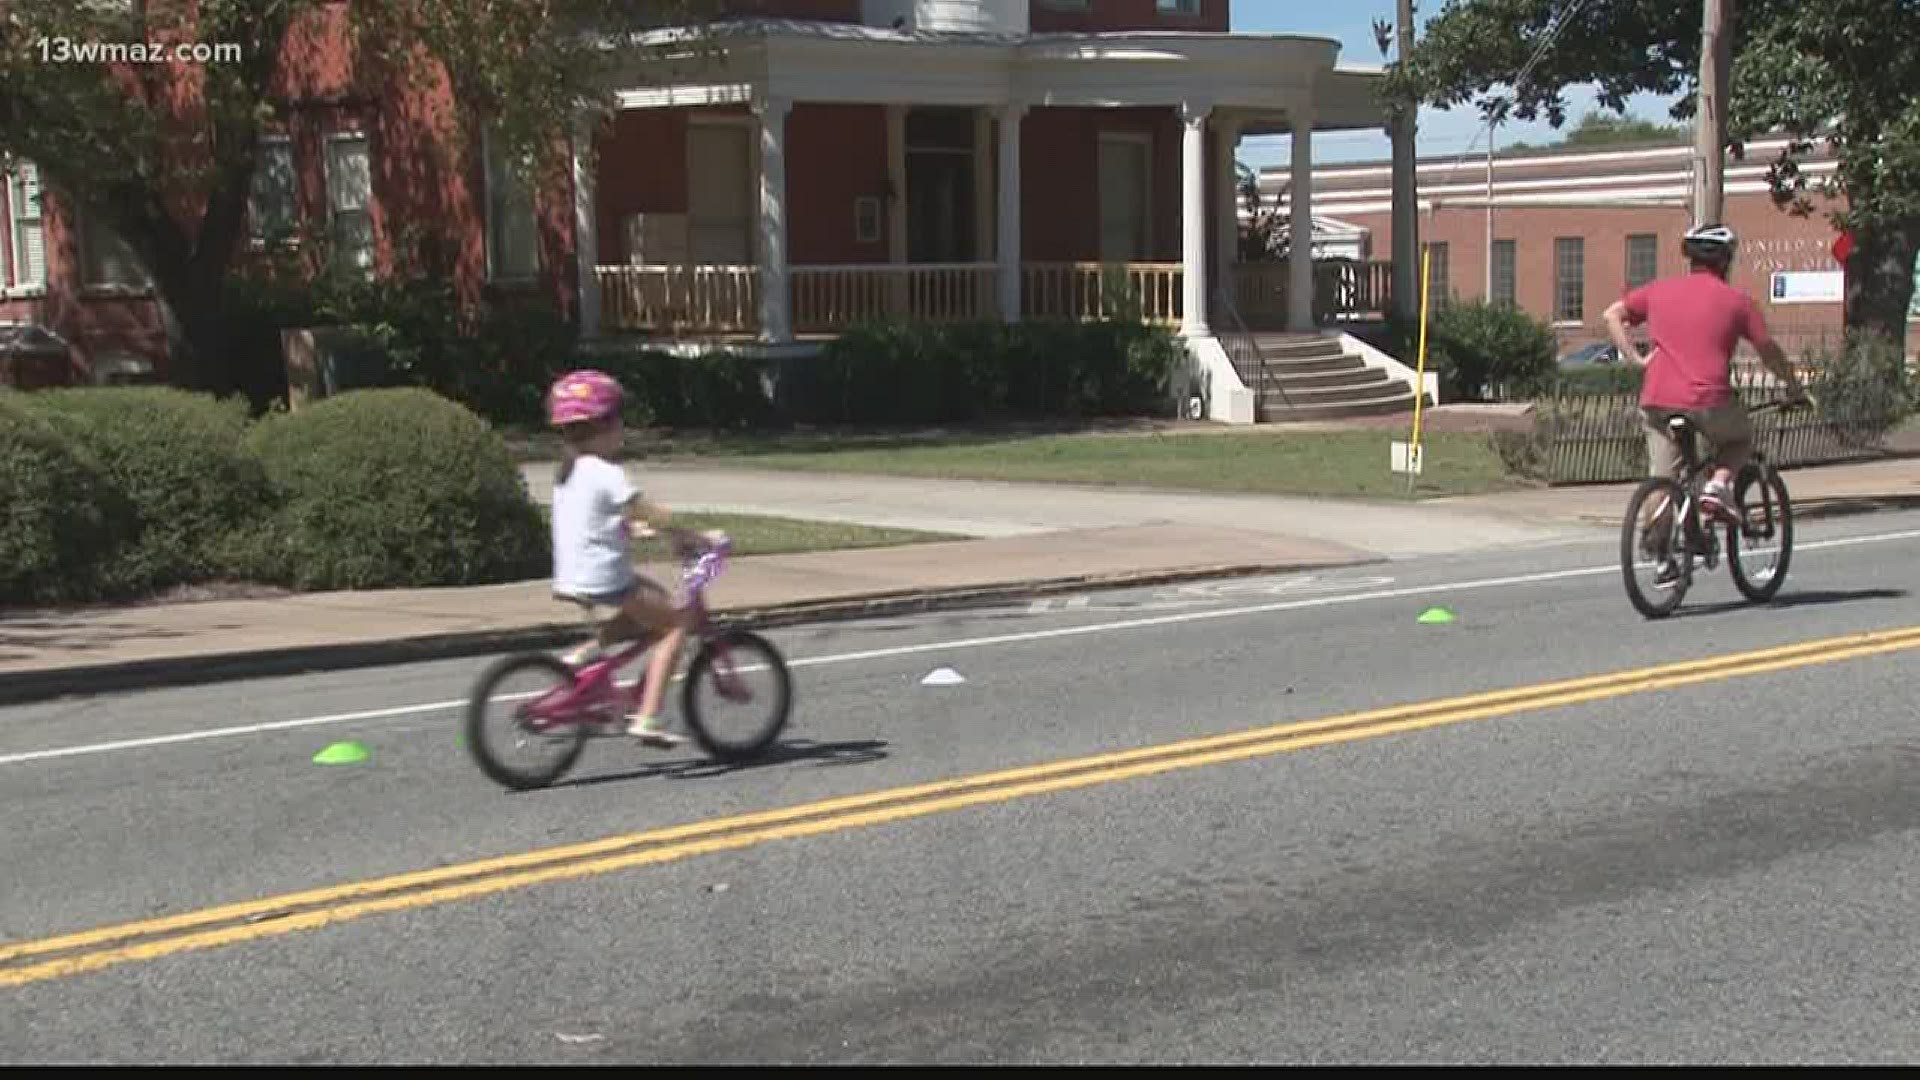 Bike Walk Macon partnered up with Recycle Macon to create a program that gets bikes to people who need them.